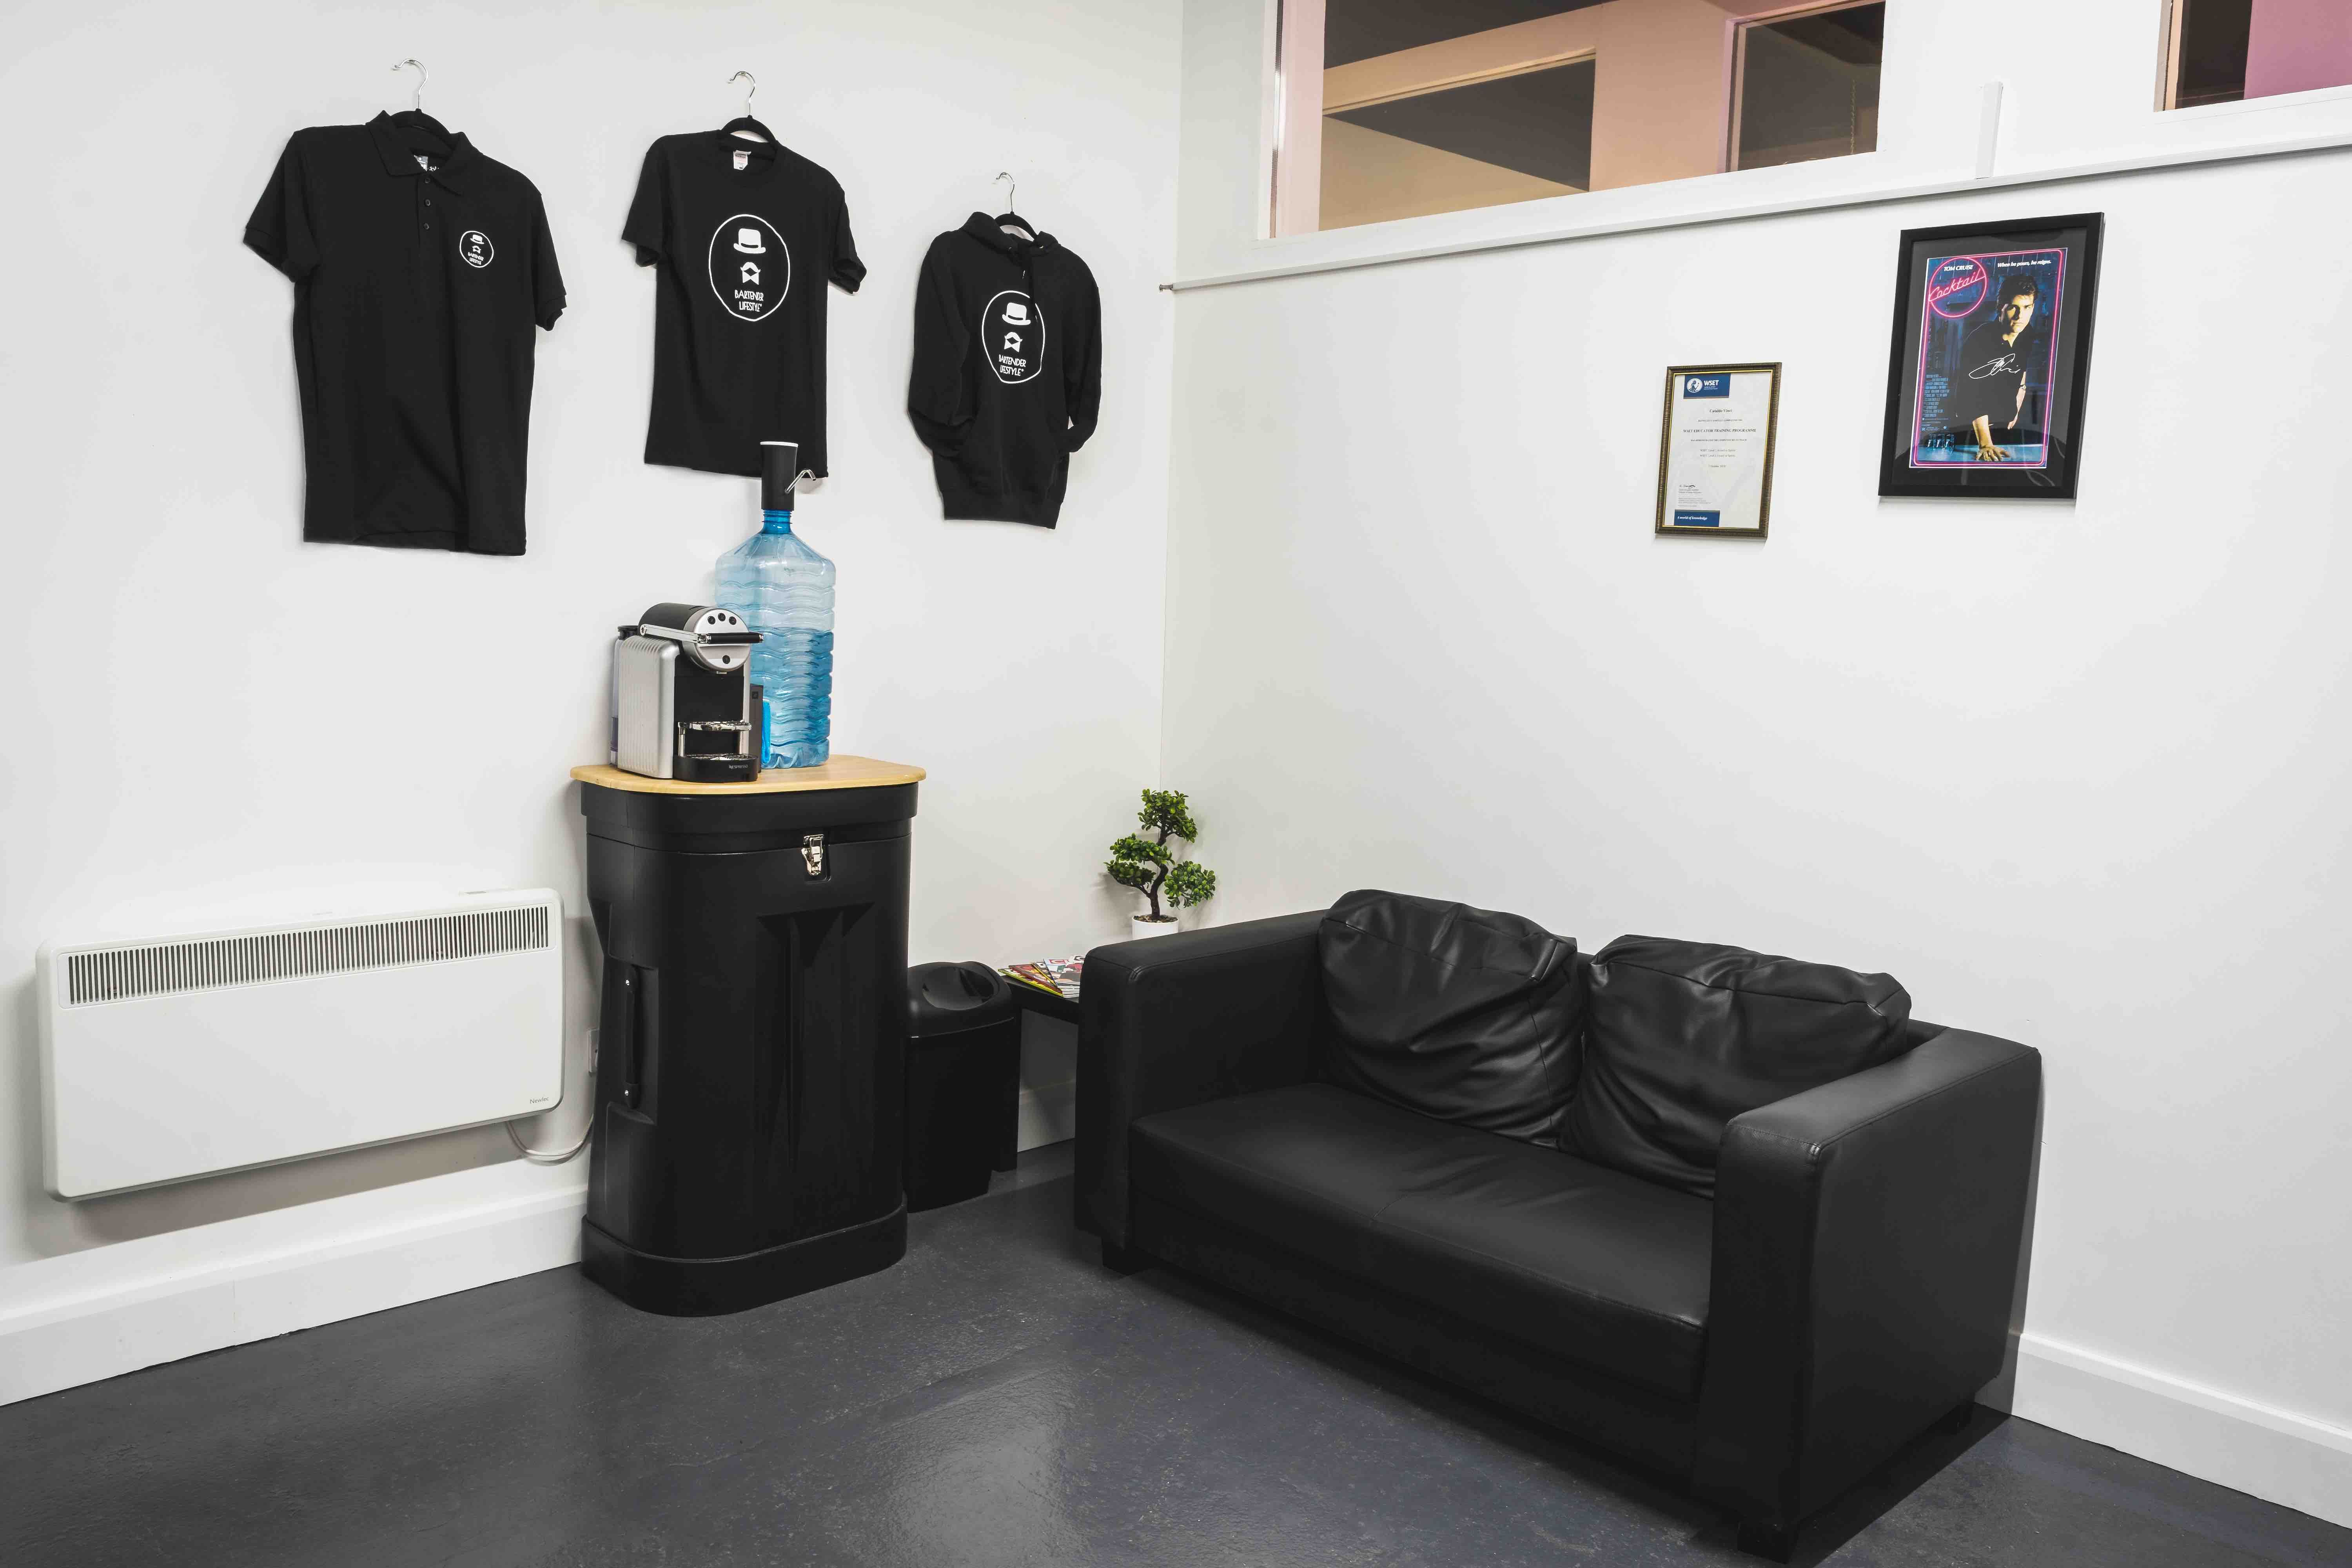 the students chilling area and our merchandise on the wall